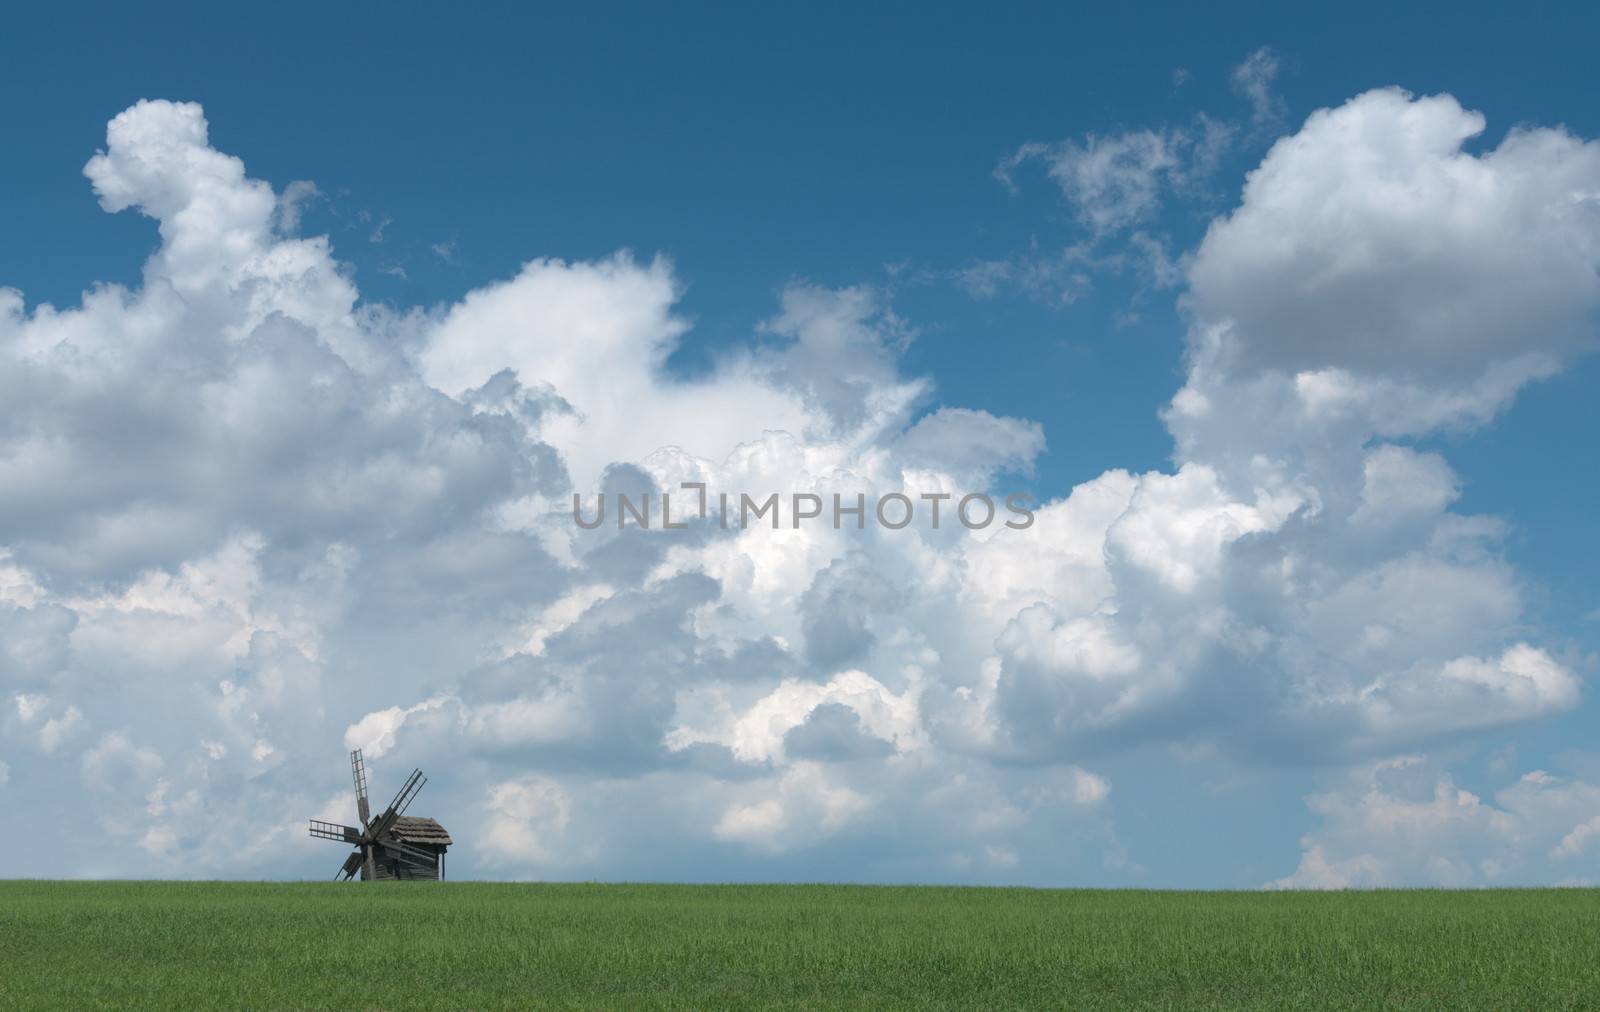 Old wooden windmill against sky with clouds.